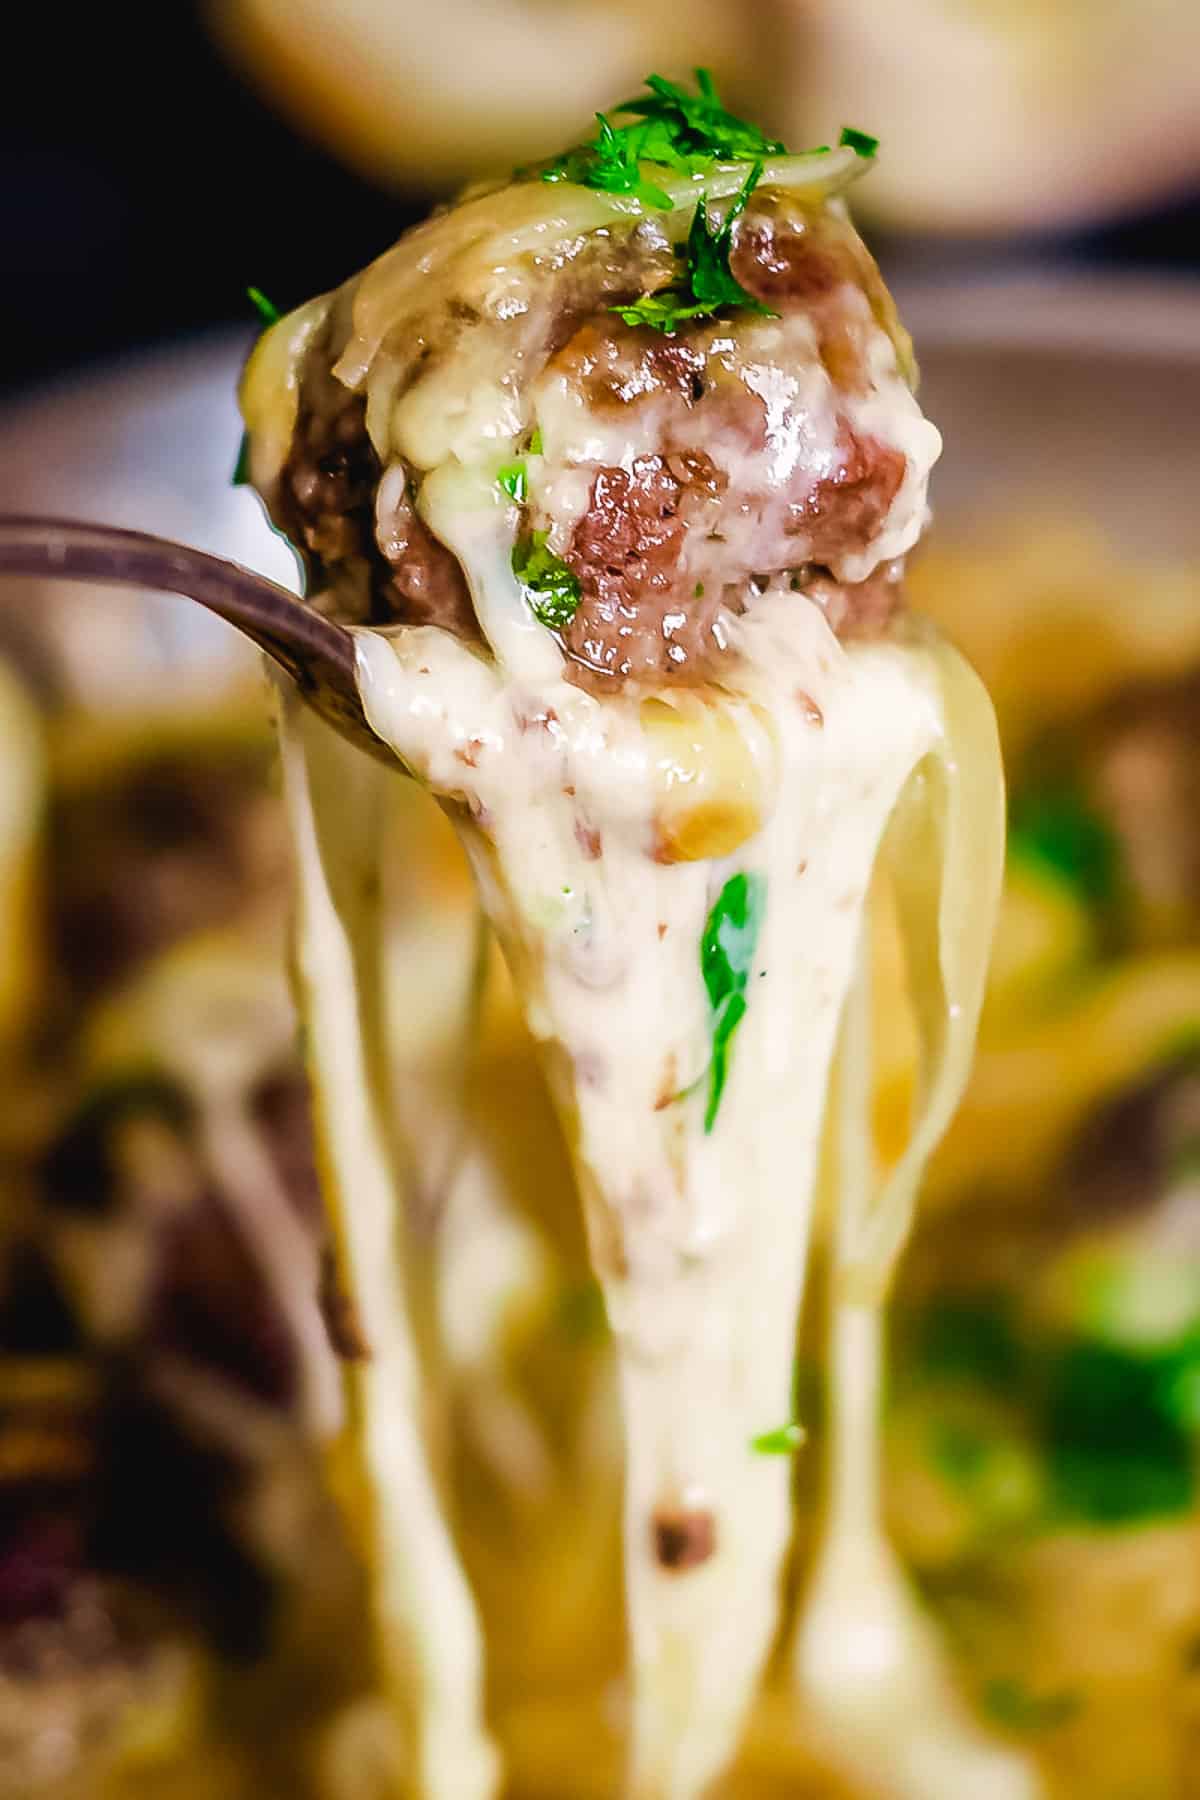 Melted cheese drips off a spoon holding a meatball.